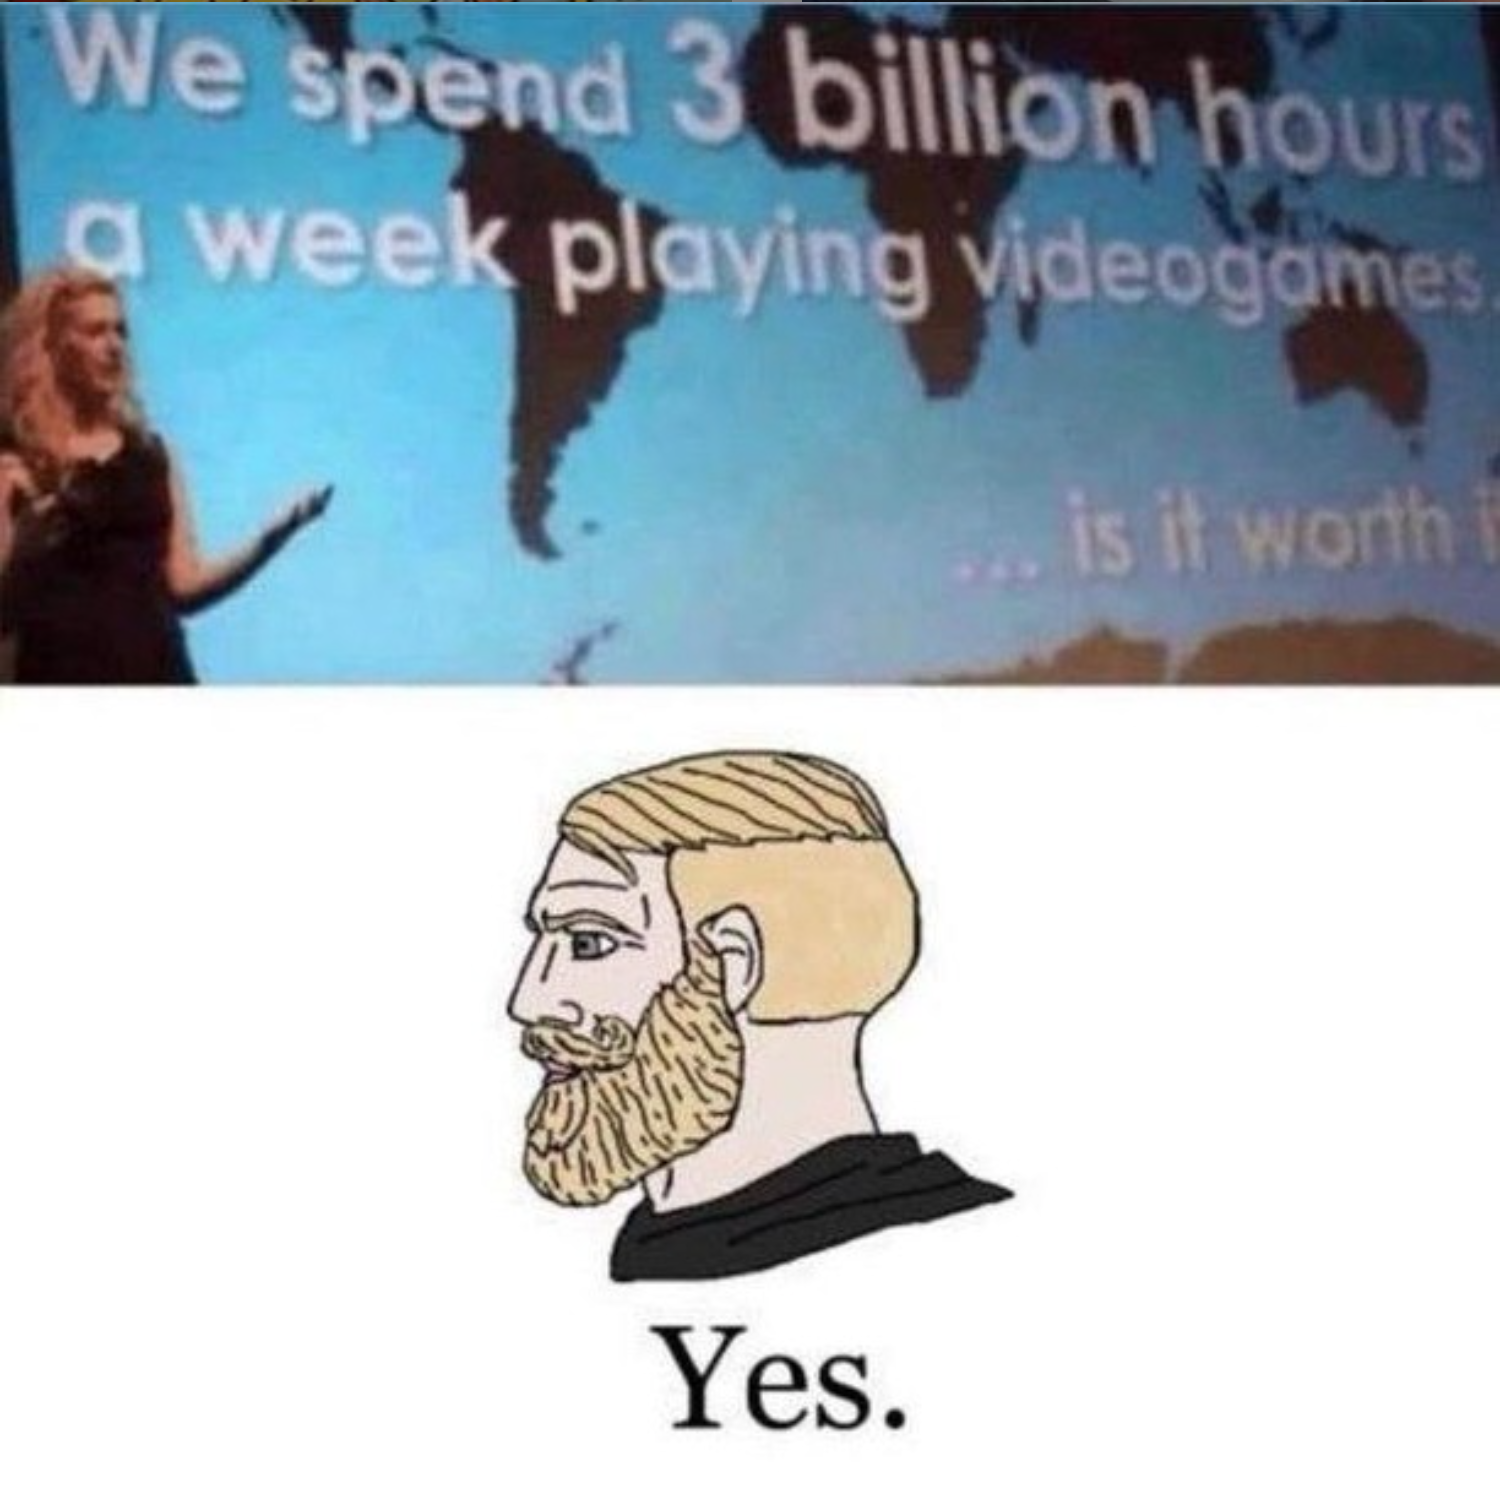 funny gaming memes  - we spend 3 billion hours a week playing video games is it worth it yes meem - We spend 3 billion hours a week playing videogames. is it worth Yes.